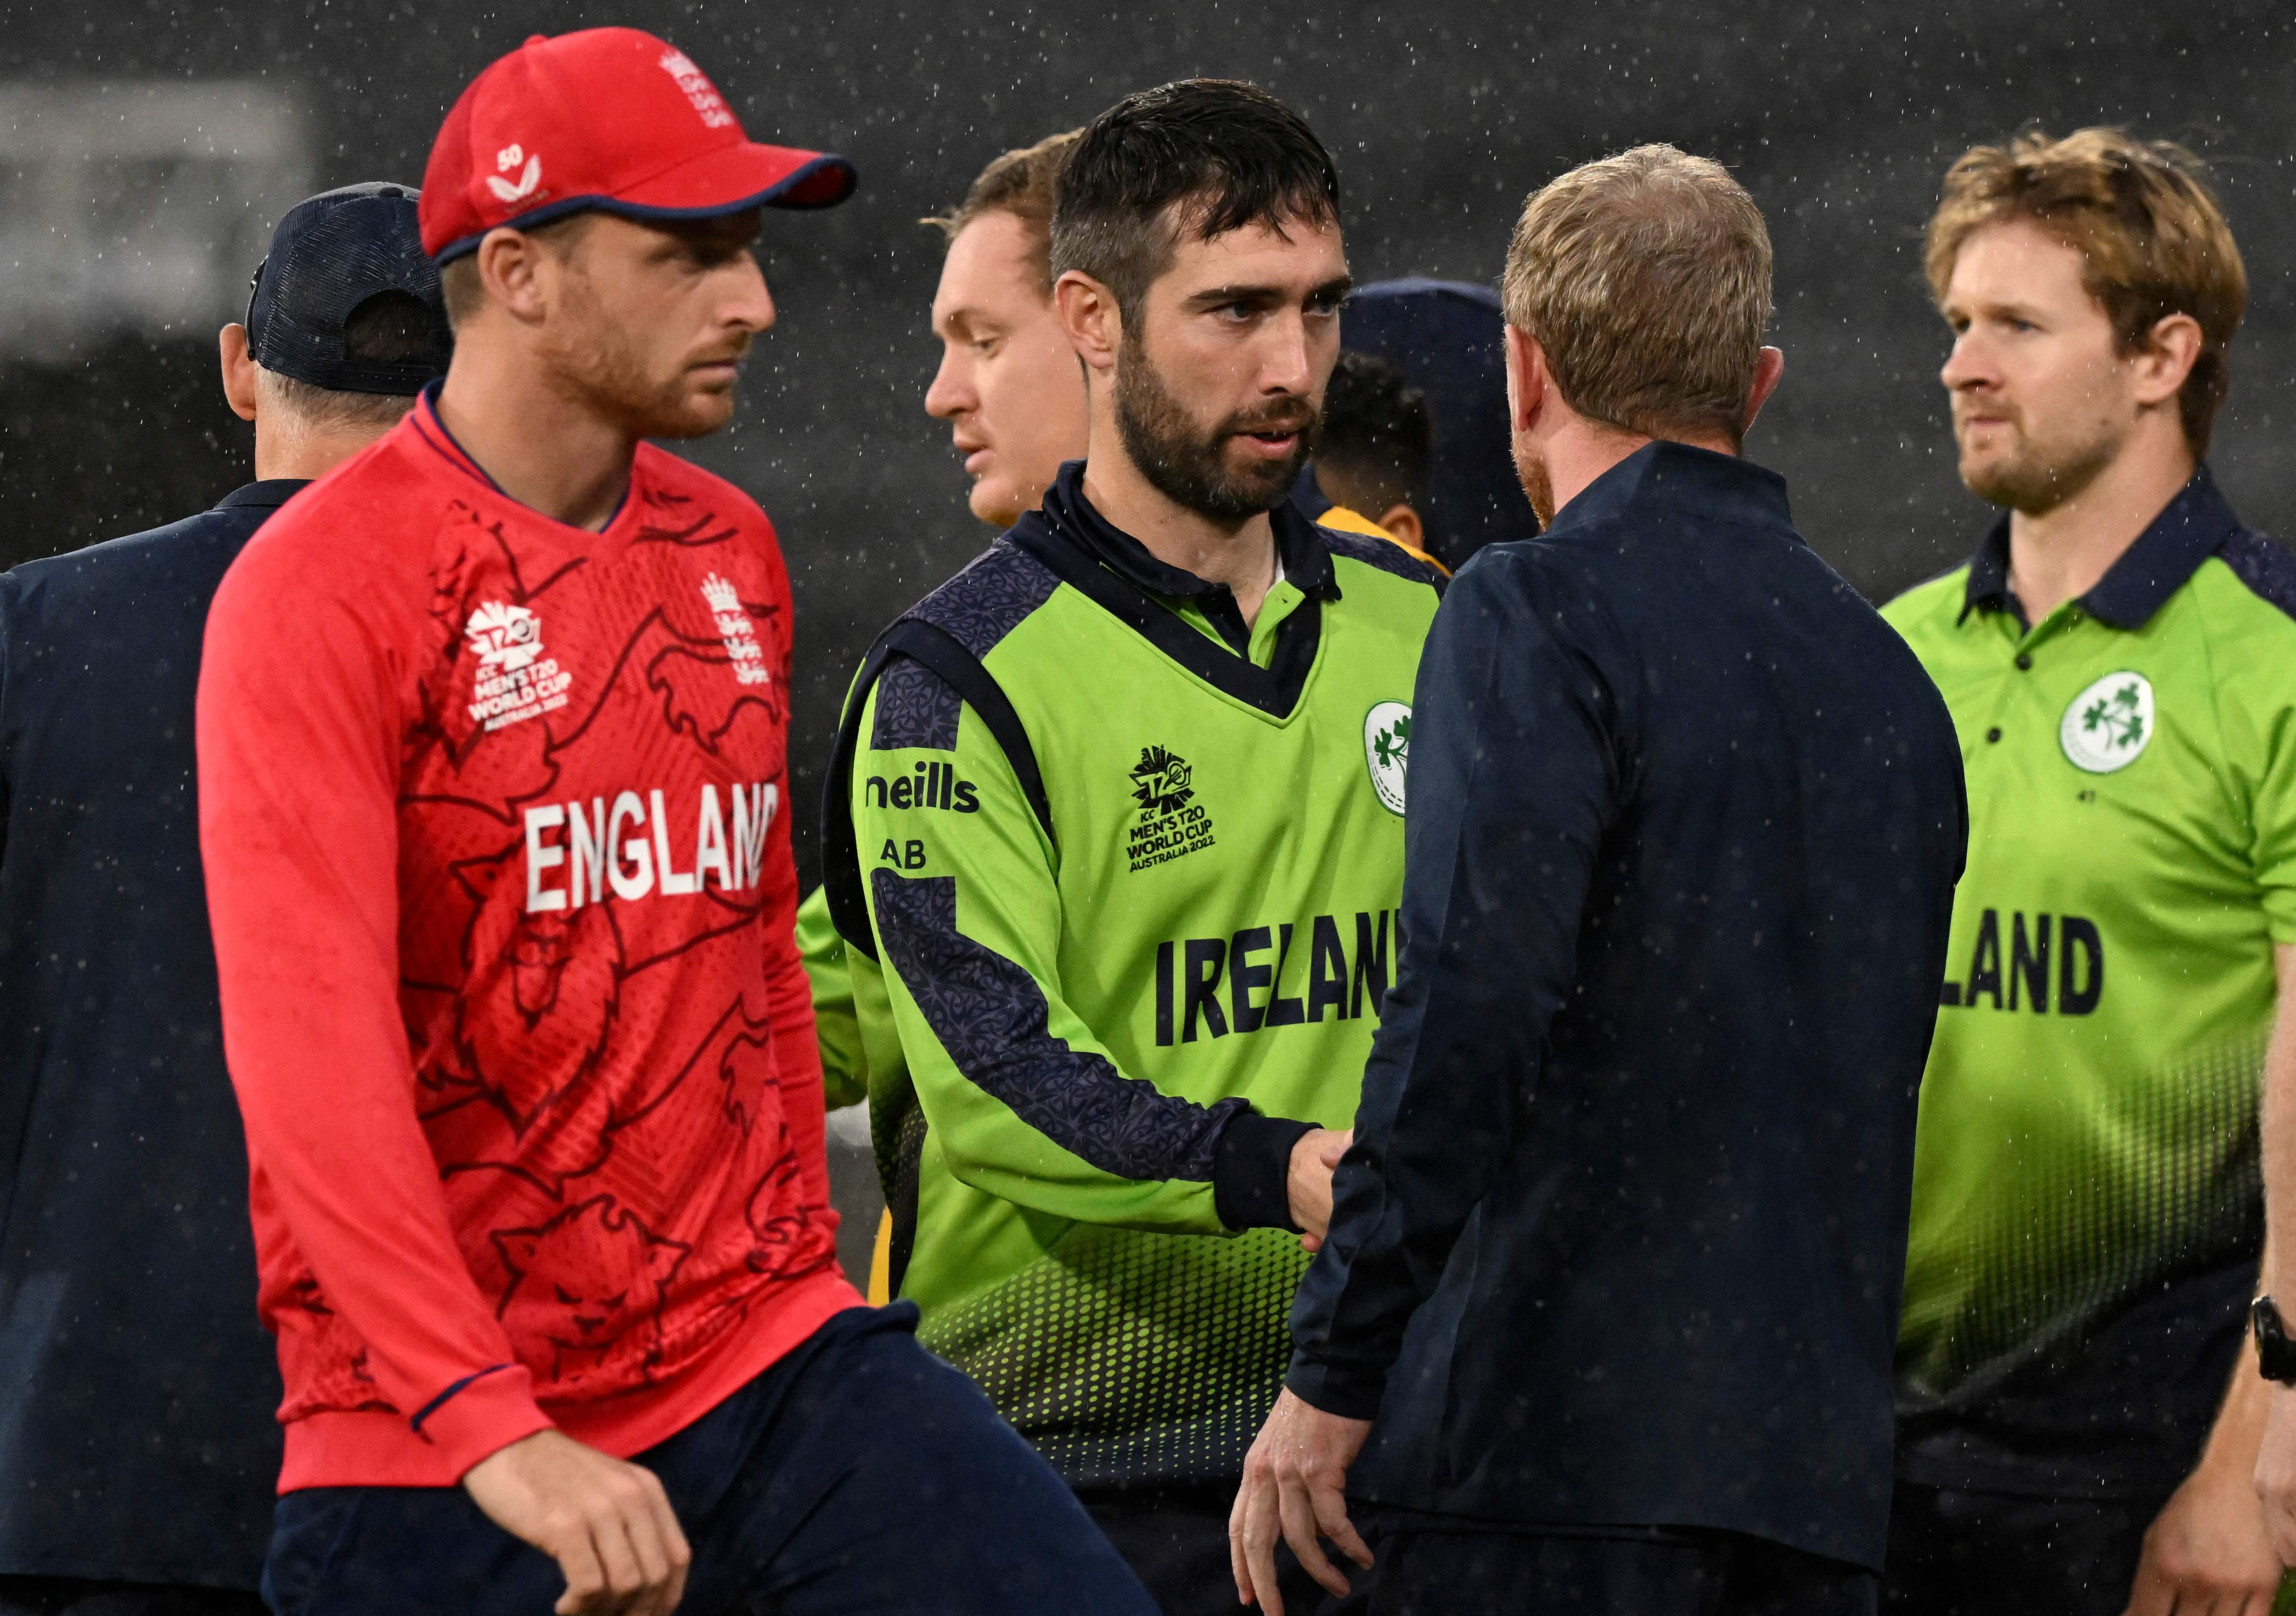 , England stunned by Ireland in shock World Cup defeat as rain stops play at MCG with Buttler’s side 5 runs behind on DLS